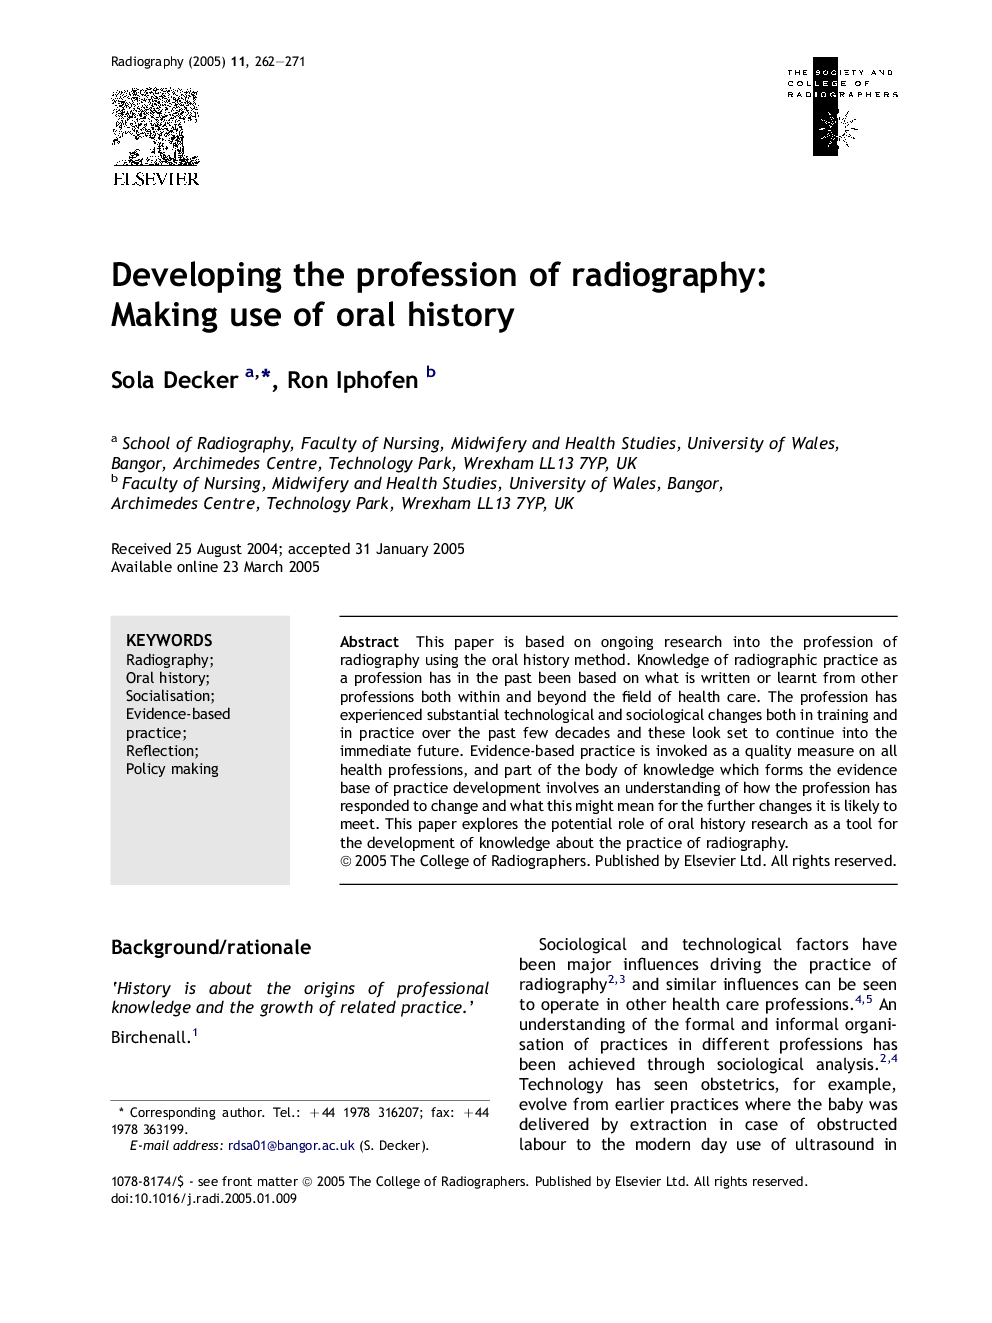 Developing the profession of radiography: Making use of oral history